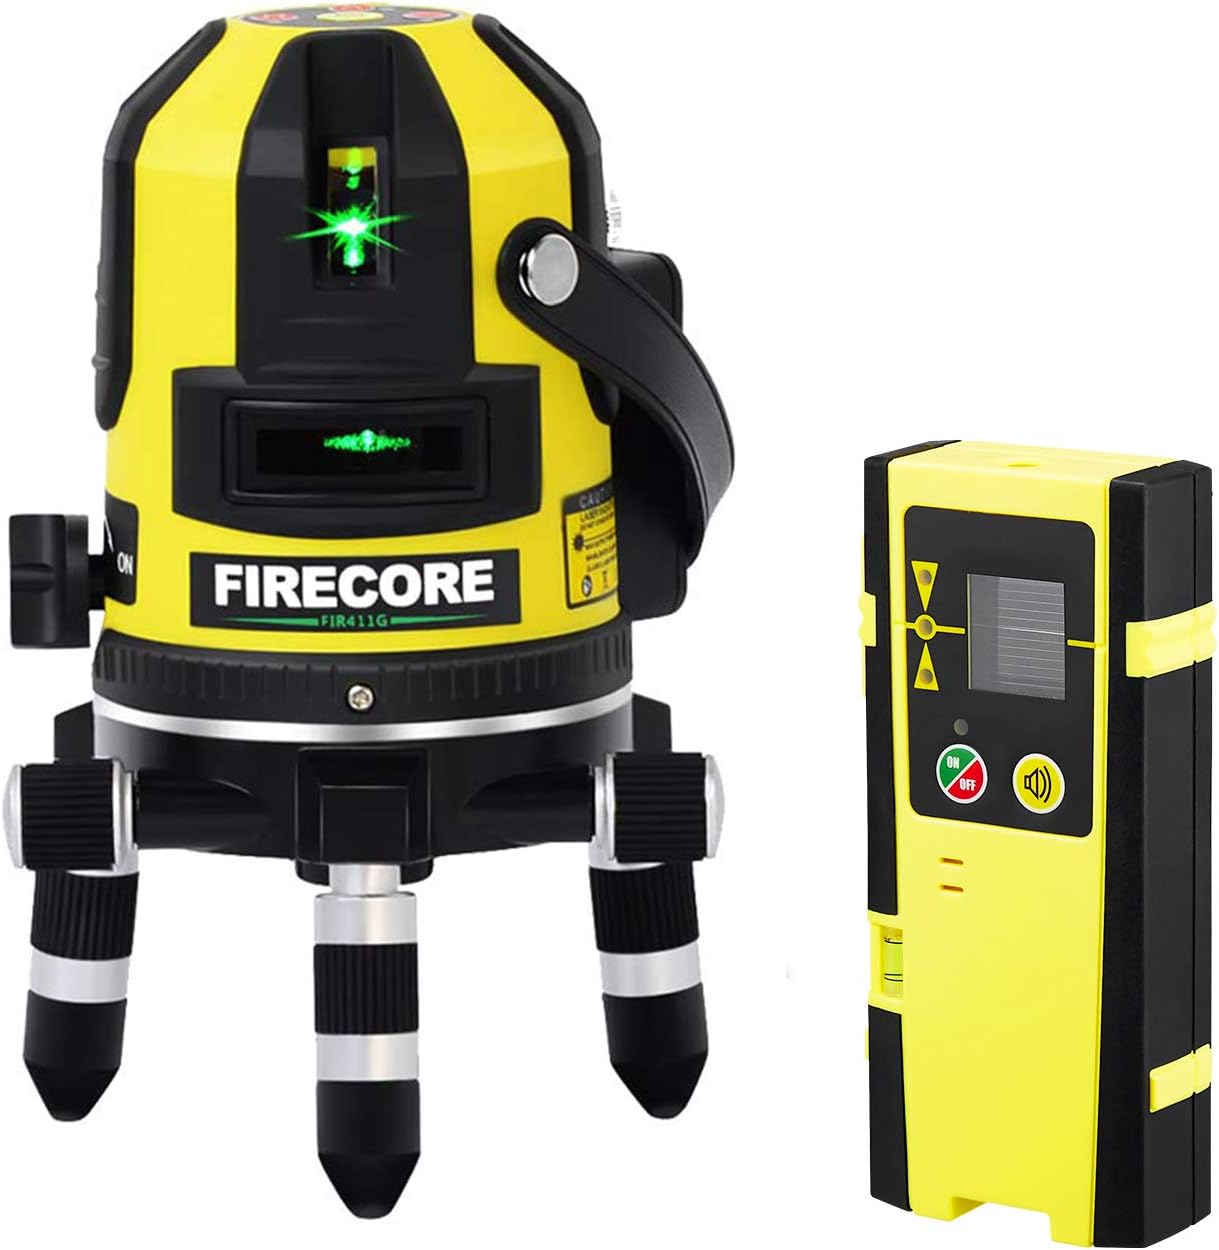 Firecore FIR411G Self-Leveling 50m Outdoor 5 Line Laser Level and Plumb Point with Detector, Green